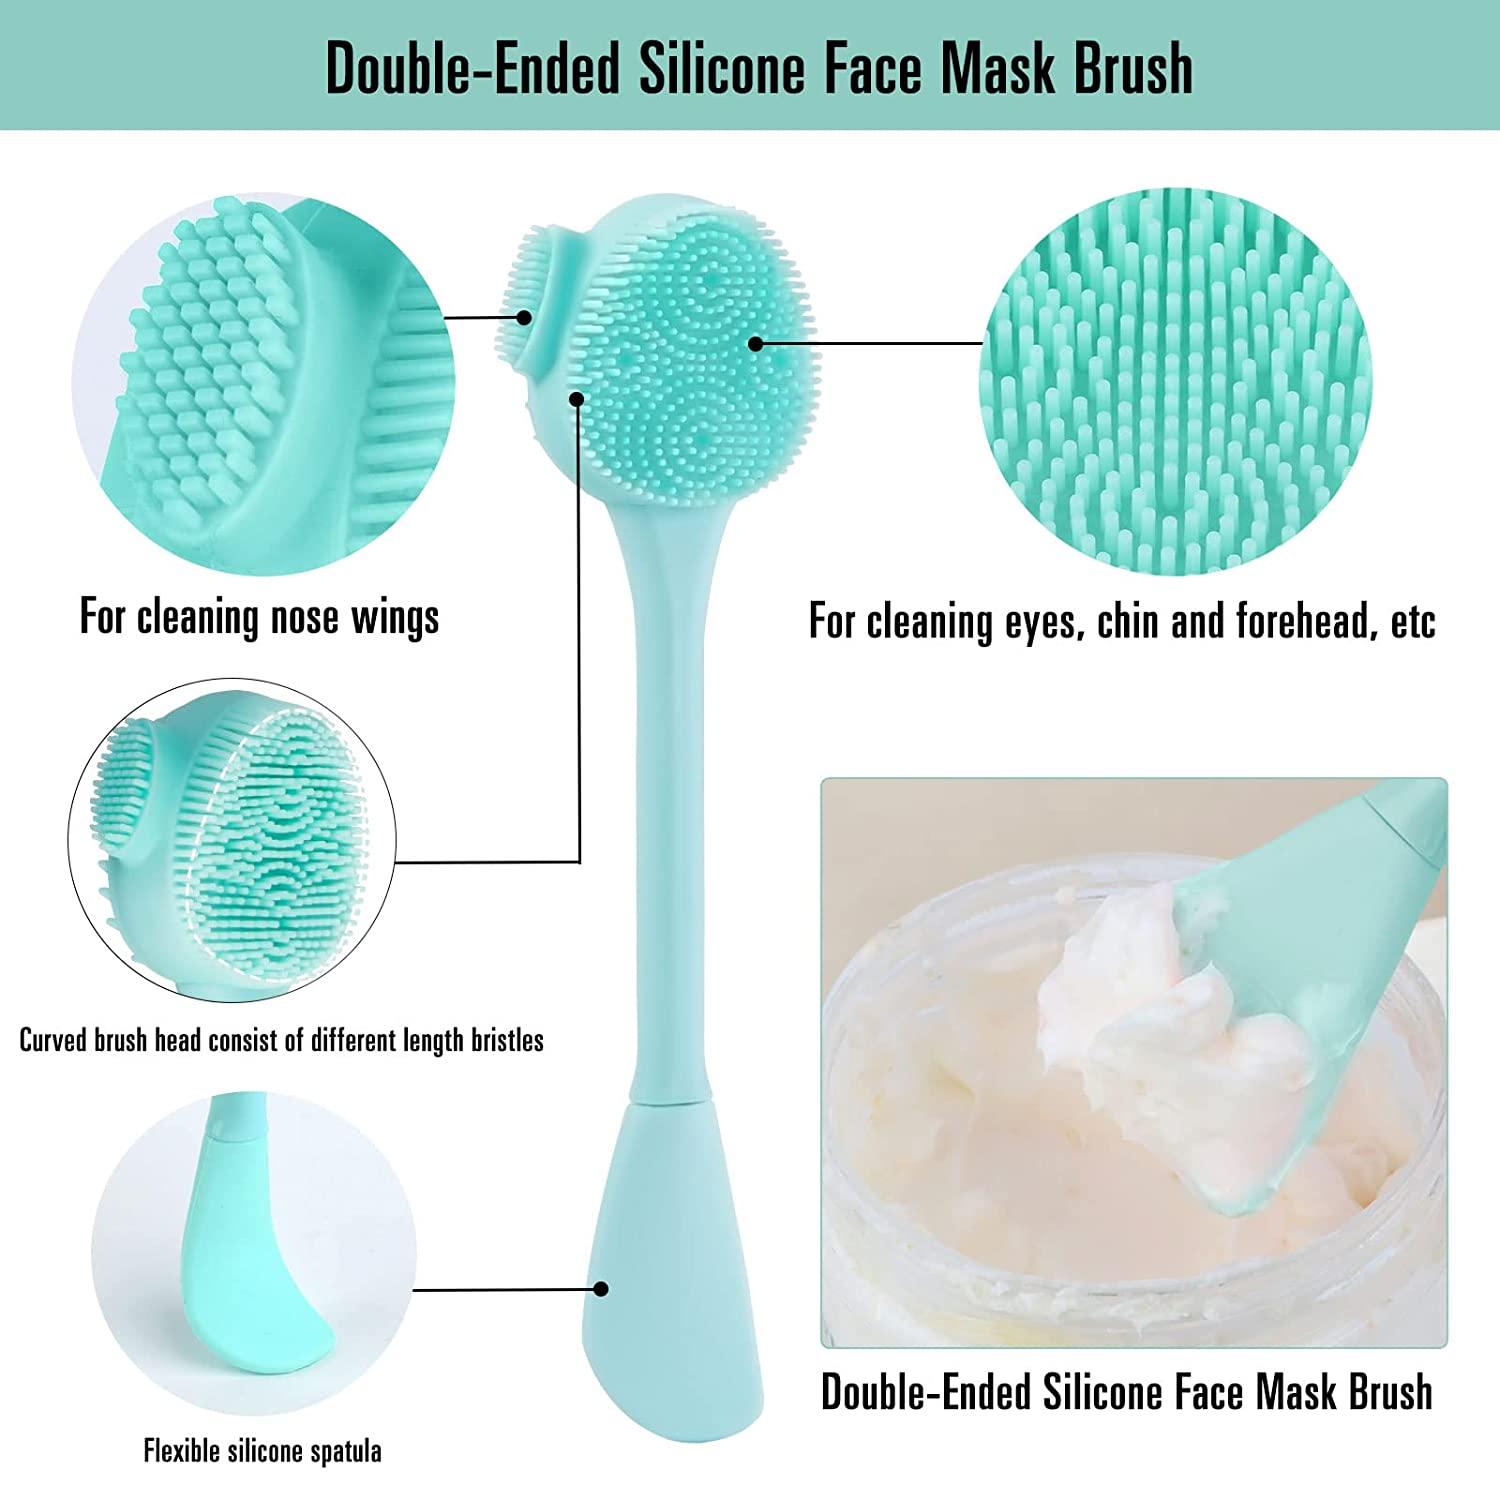 How to Clean Silicone Beauty Tools and Personal Devices